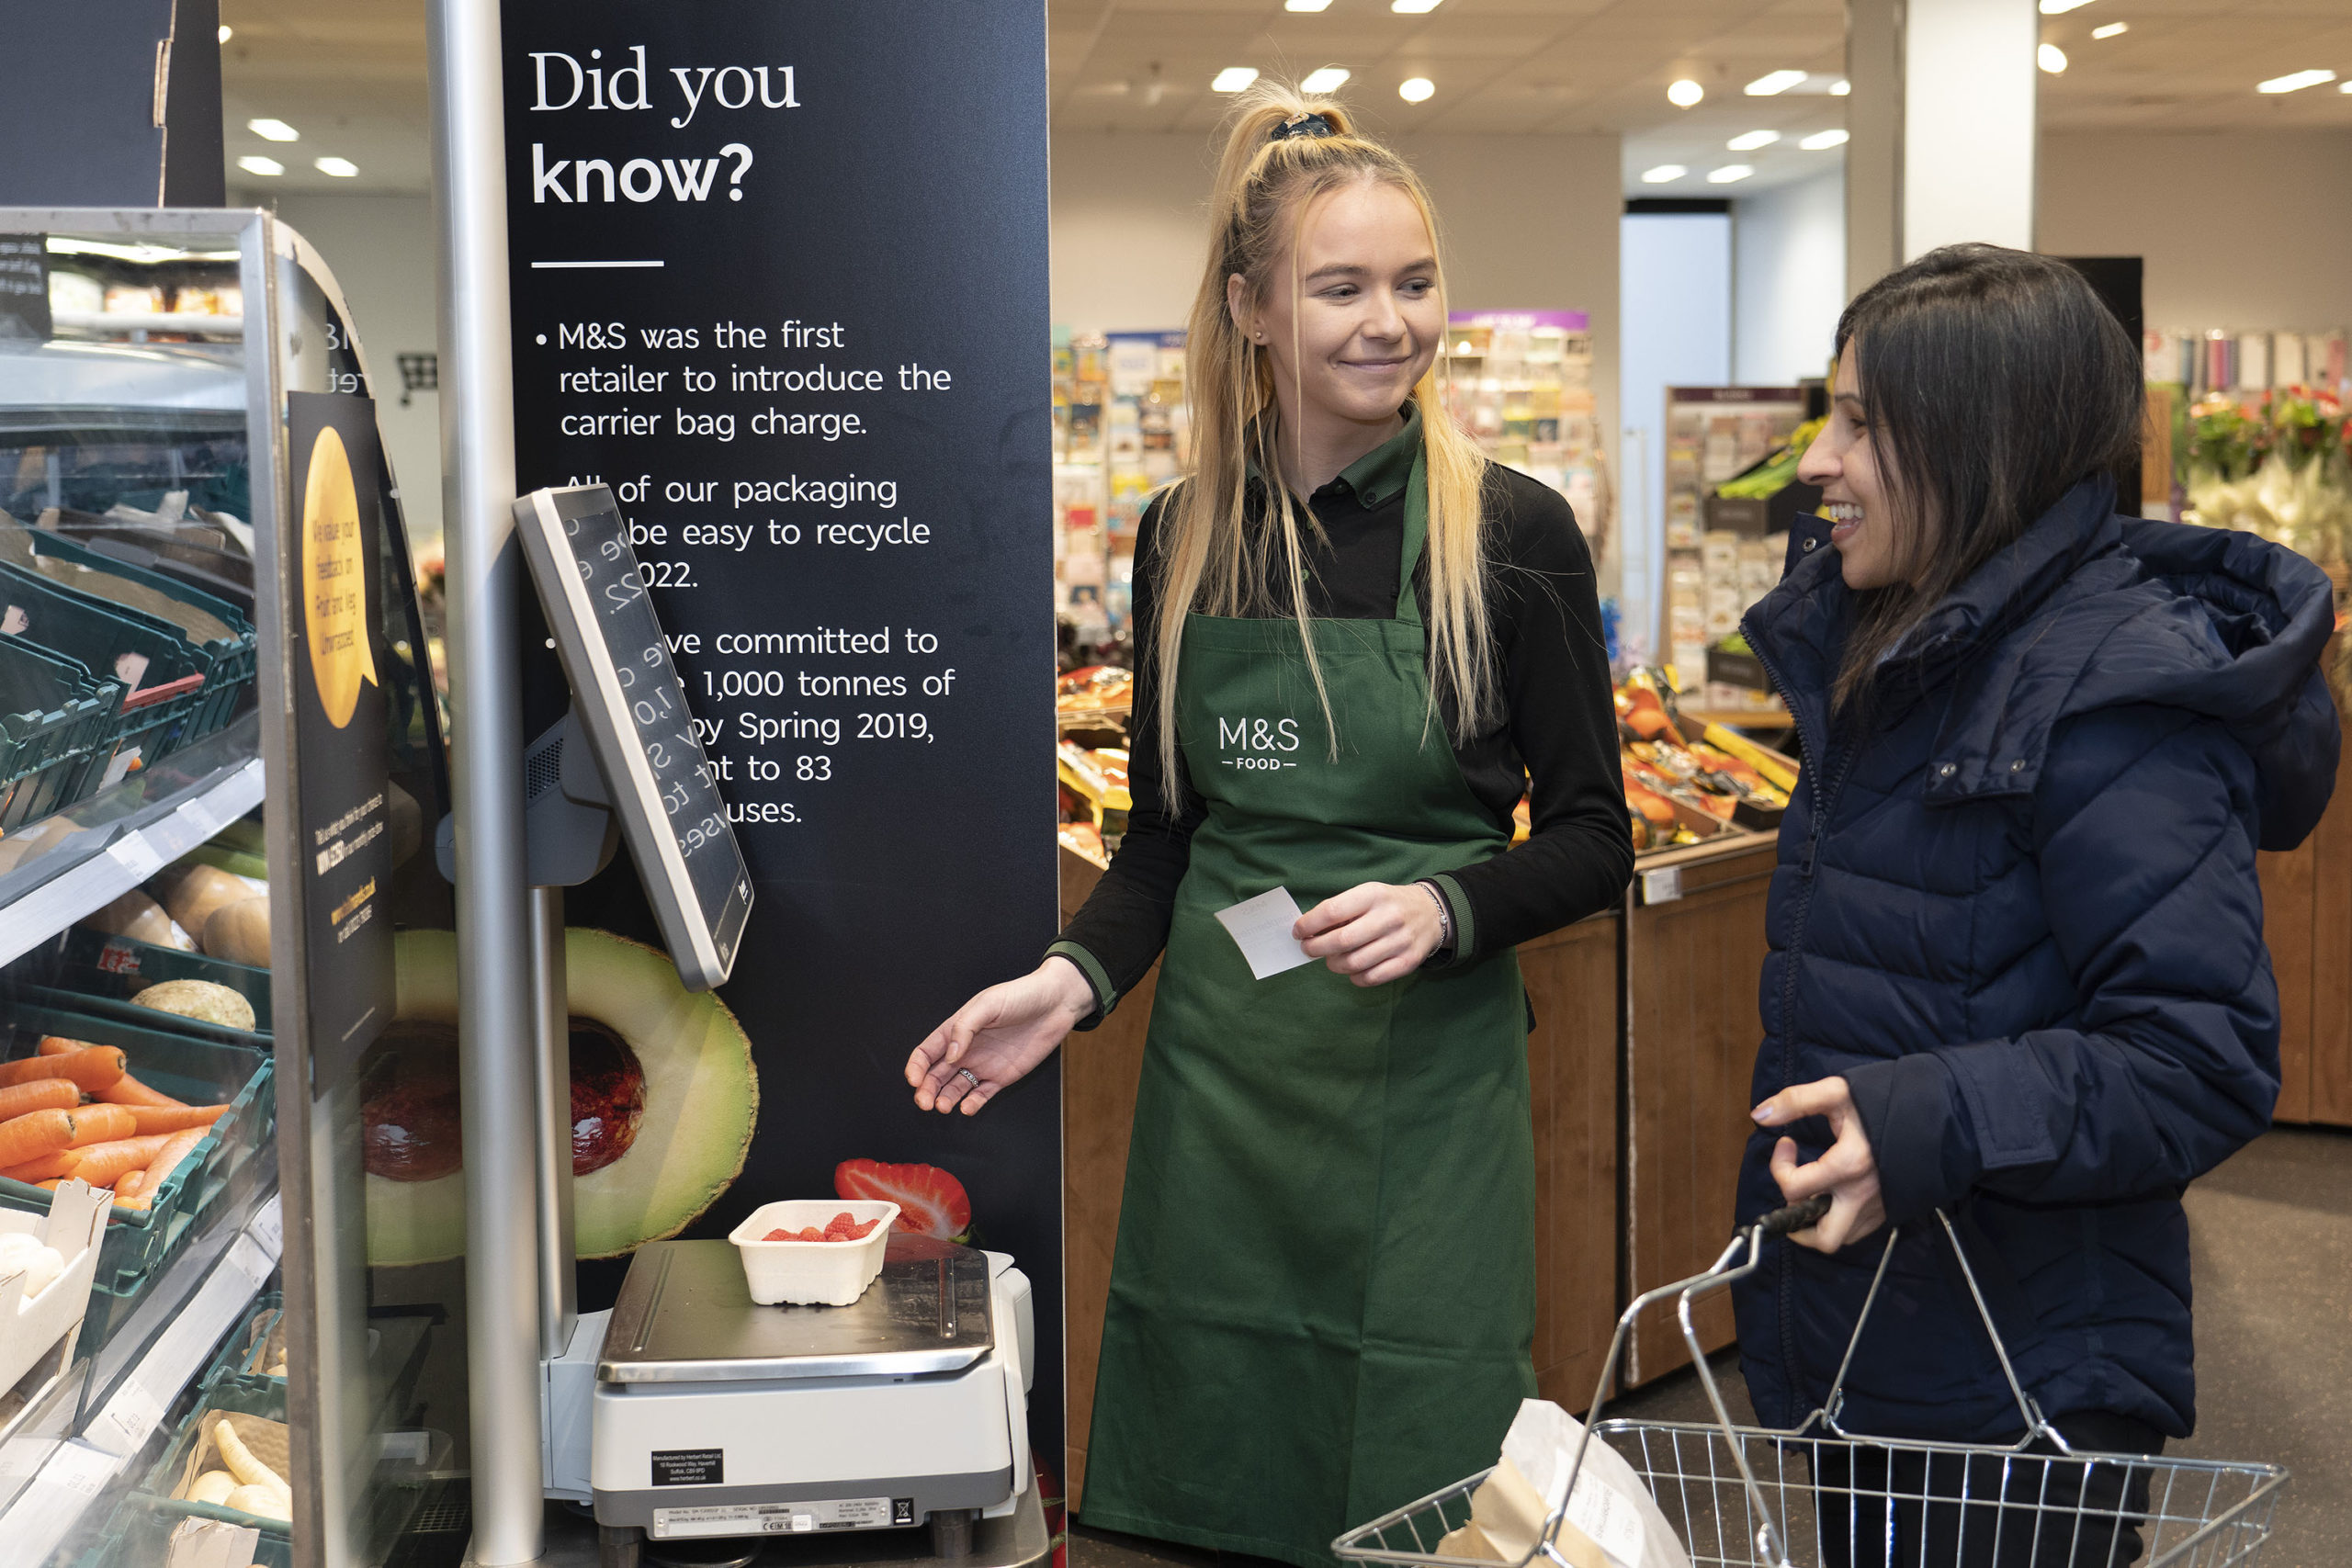 m-and-s-tolworth-greengrocer-lauren-nichols-helps-customer-weigh